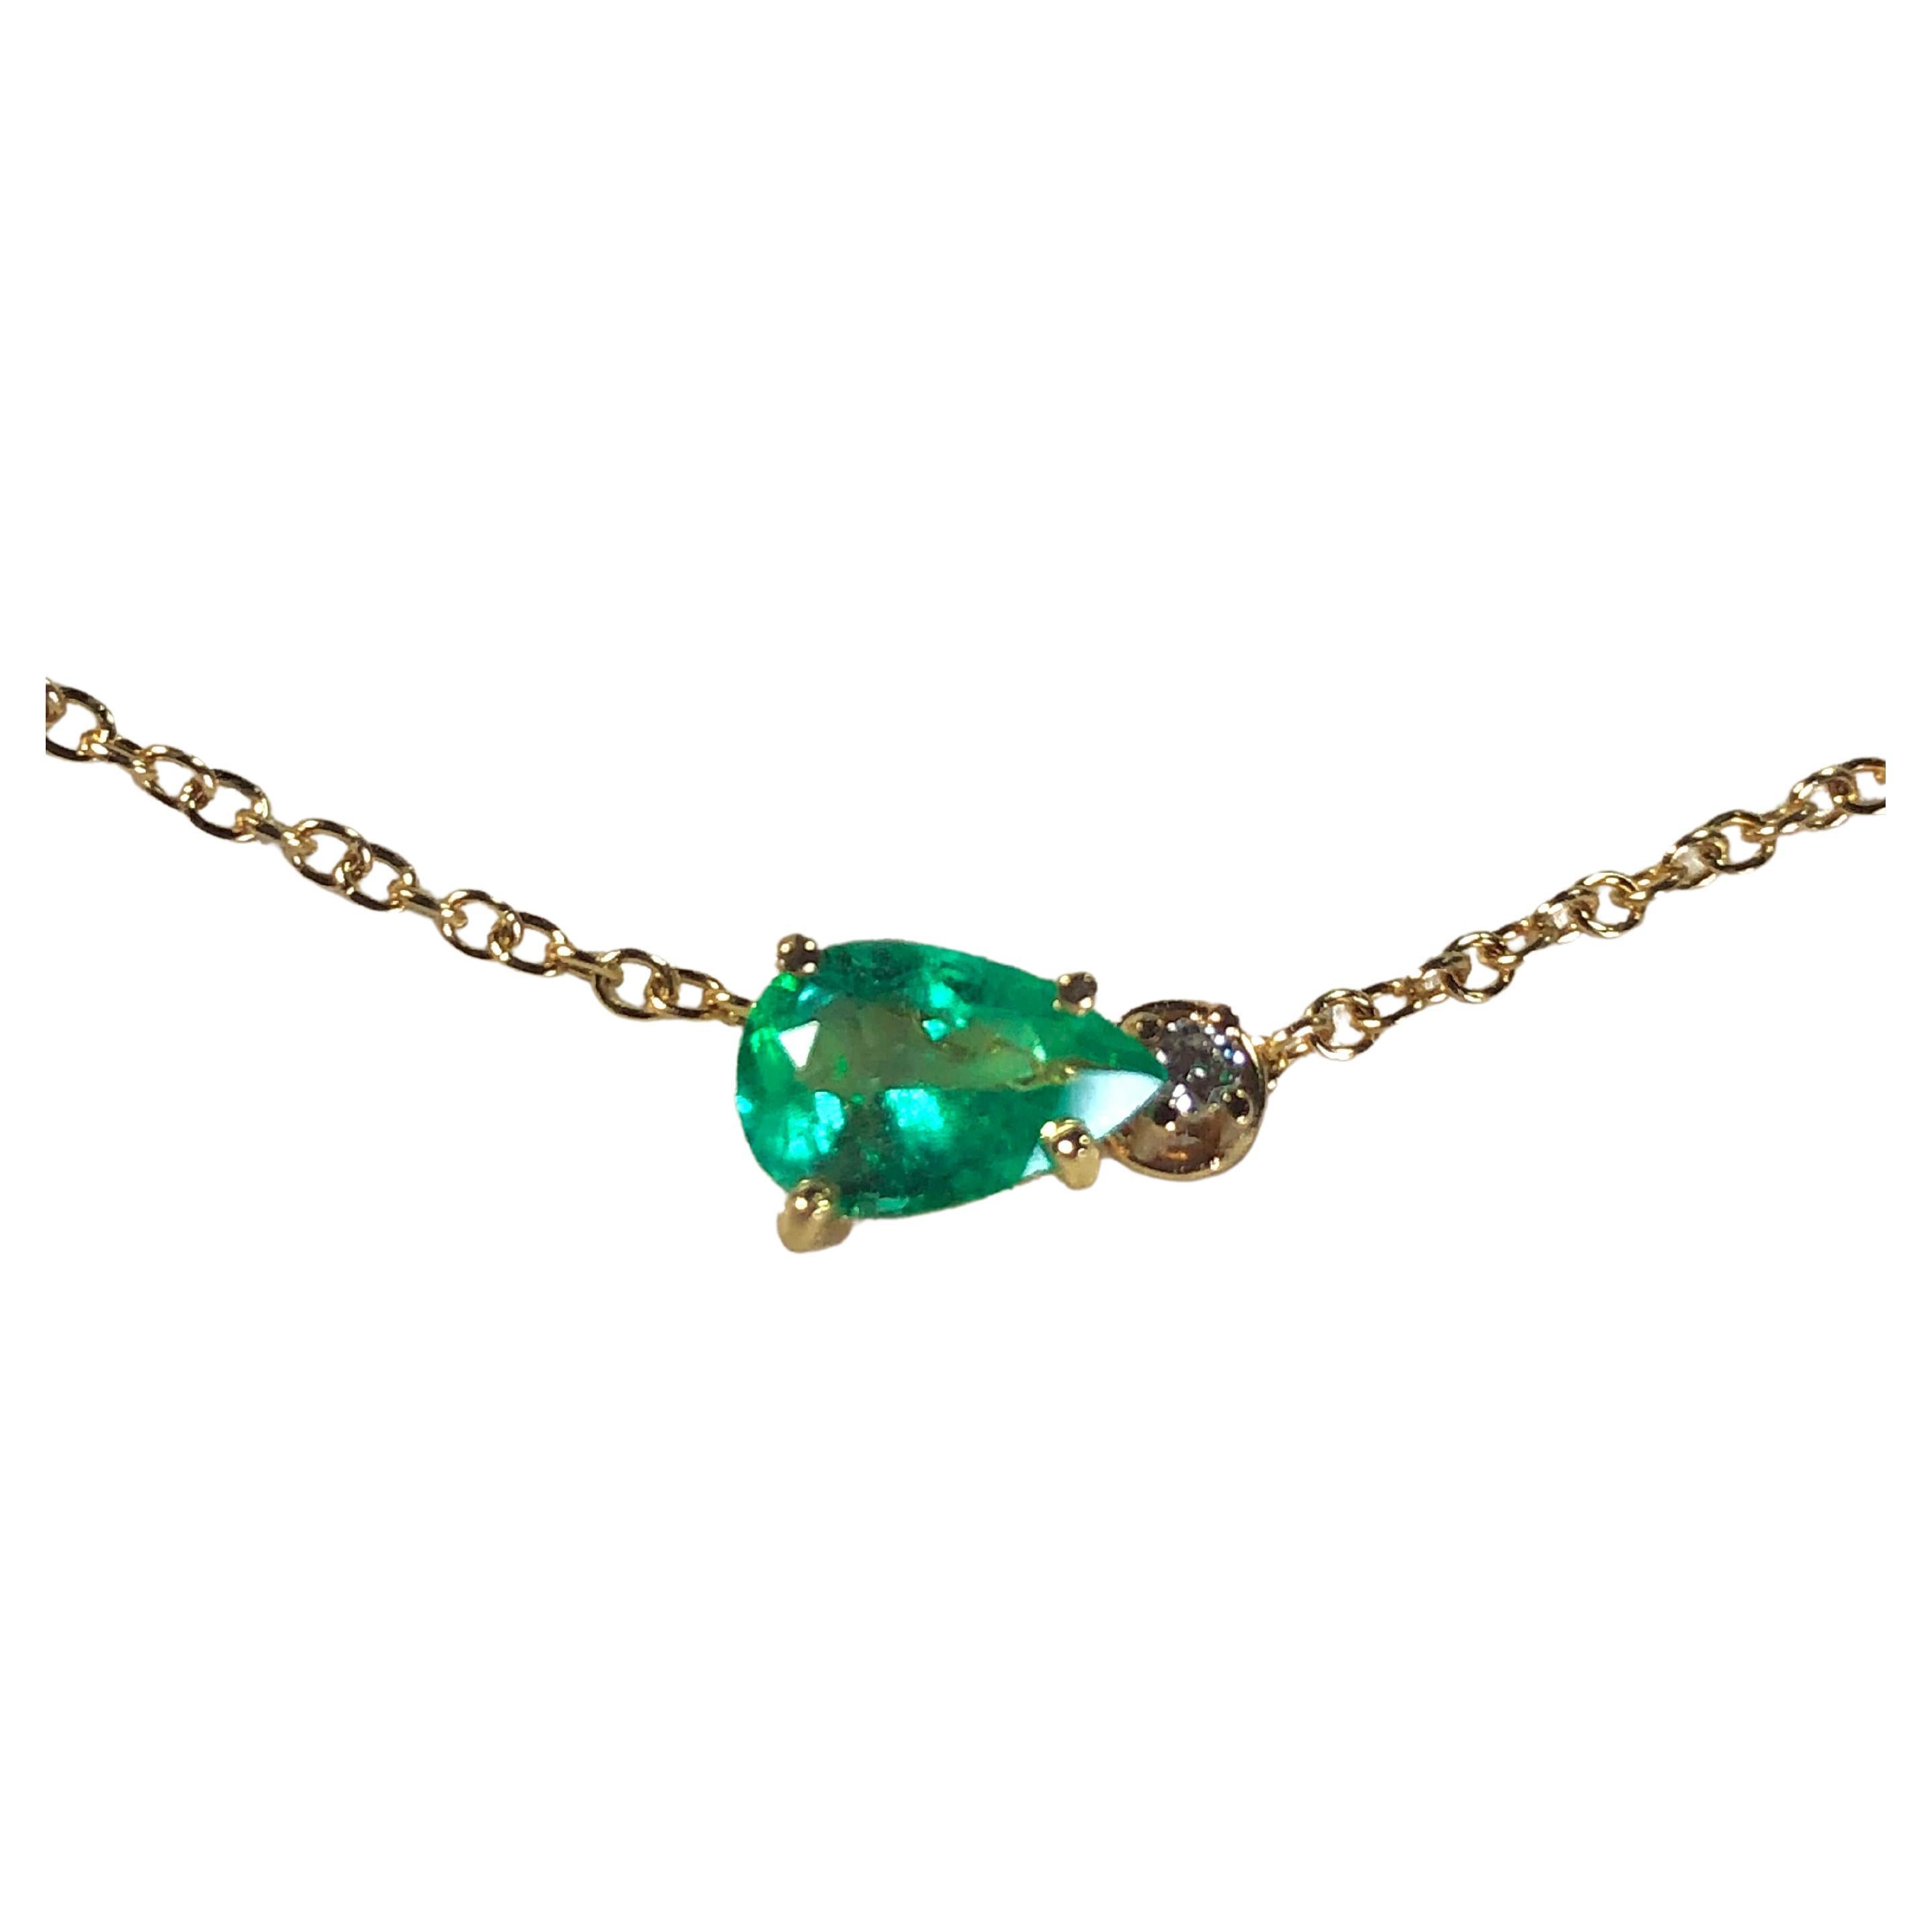 Pear Shape Colombian Emerald Solitaire Pendant Drop Necklace in 18K Yellow Gold
This fine necklace features a medium-fine green natural Colombian emerald approx. 1.00 Carat, Pear Shaped with a 2mm diamond accented.
Chain 18K Yellow Gold Cable